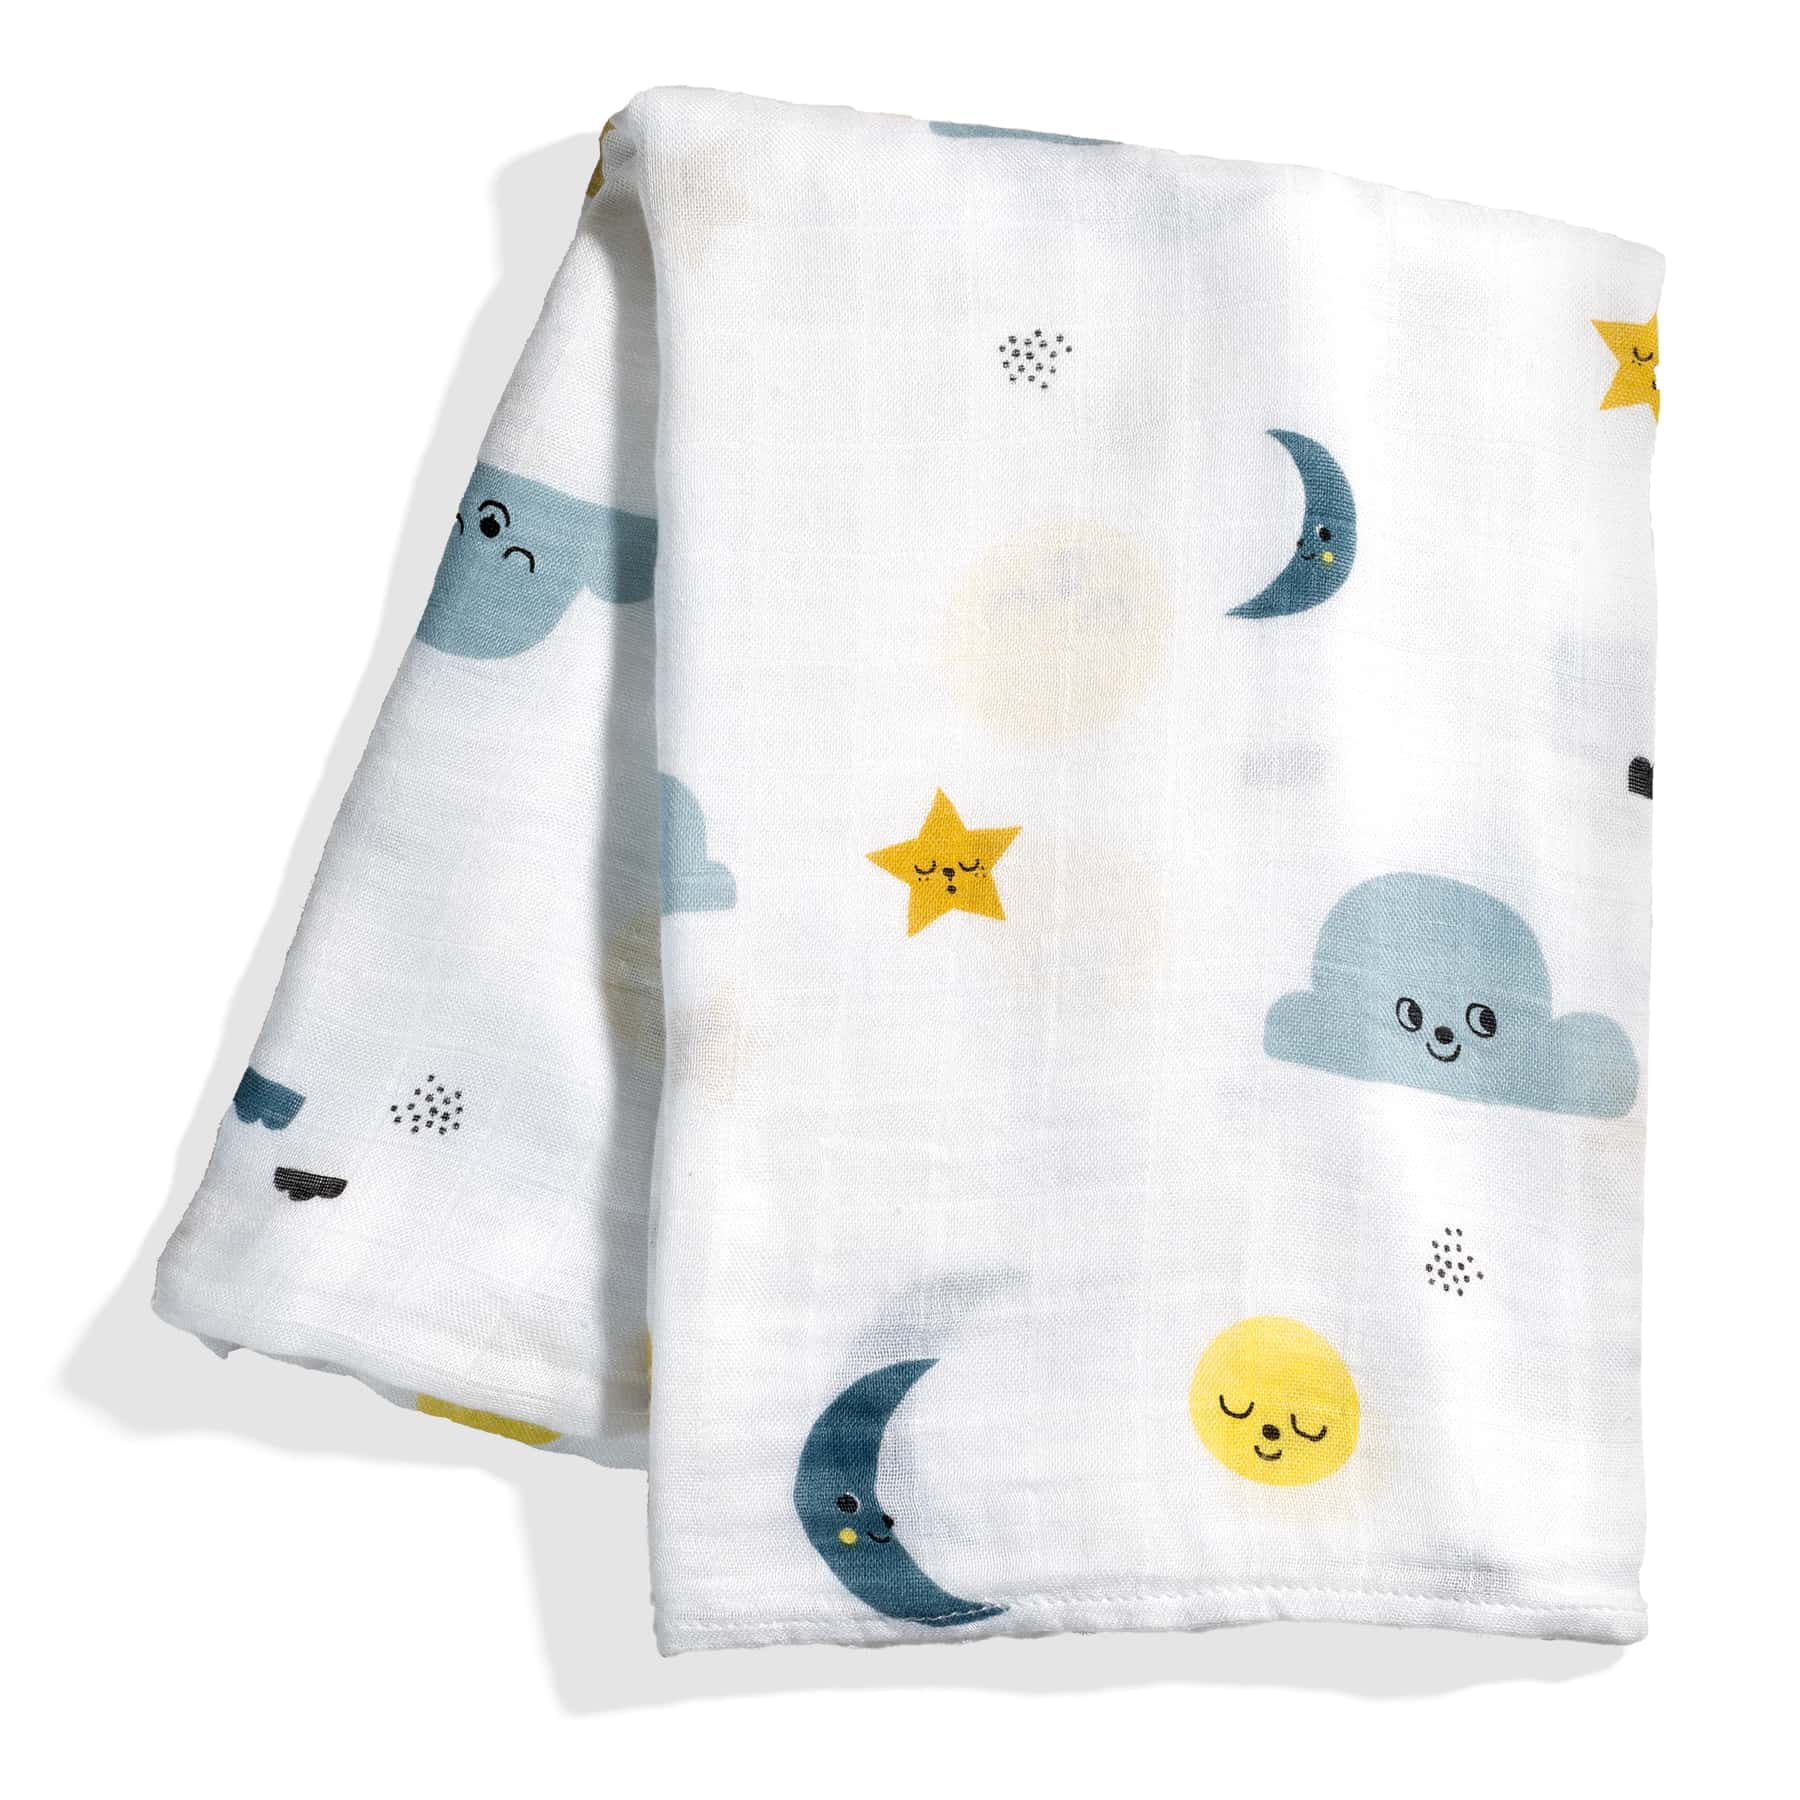 softest baby swaddle, bamboo swaddle moon stars and clouds by Rookie Humans